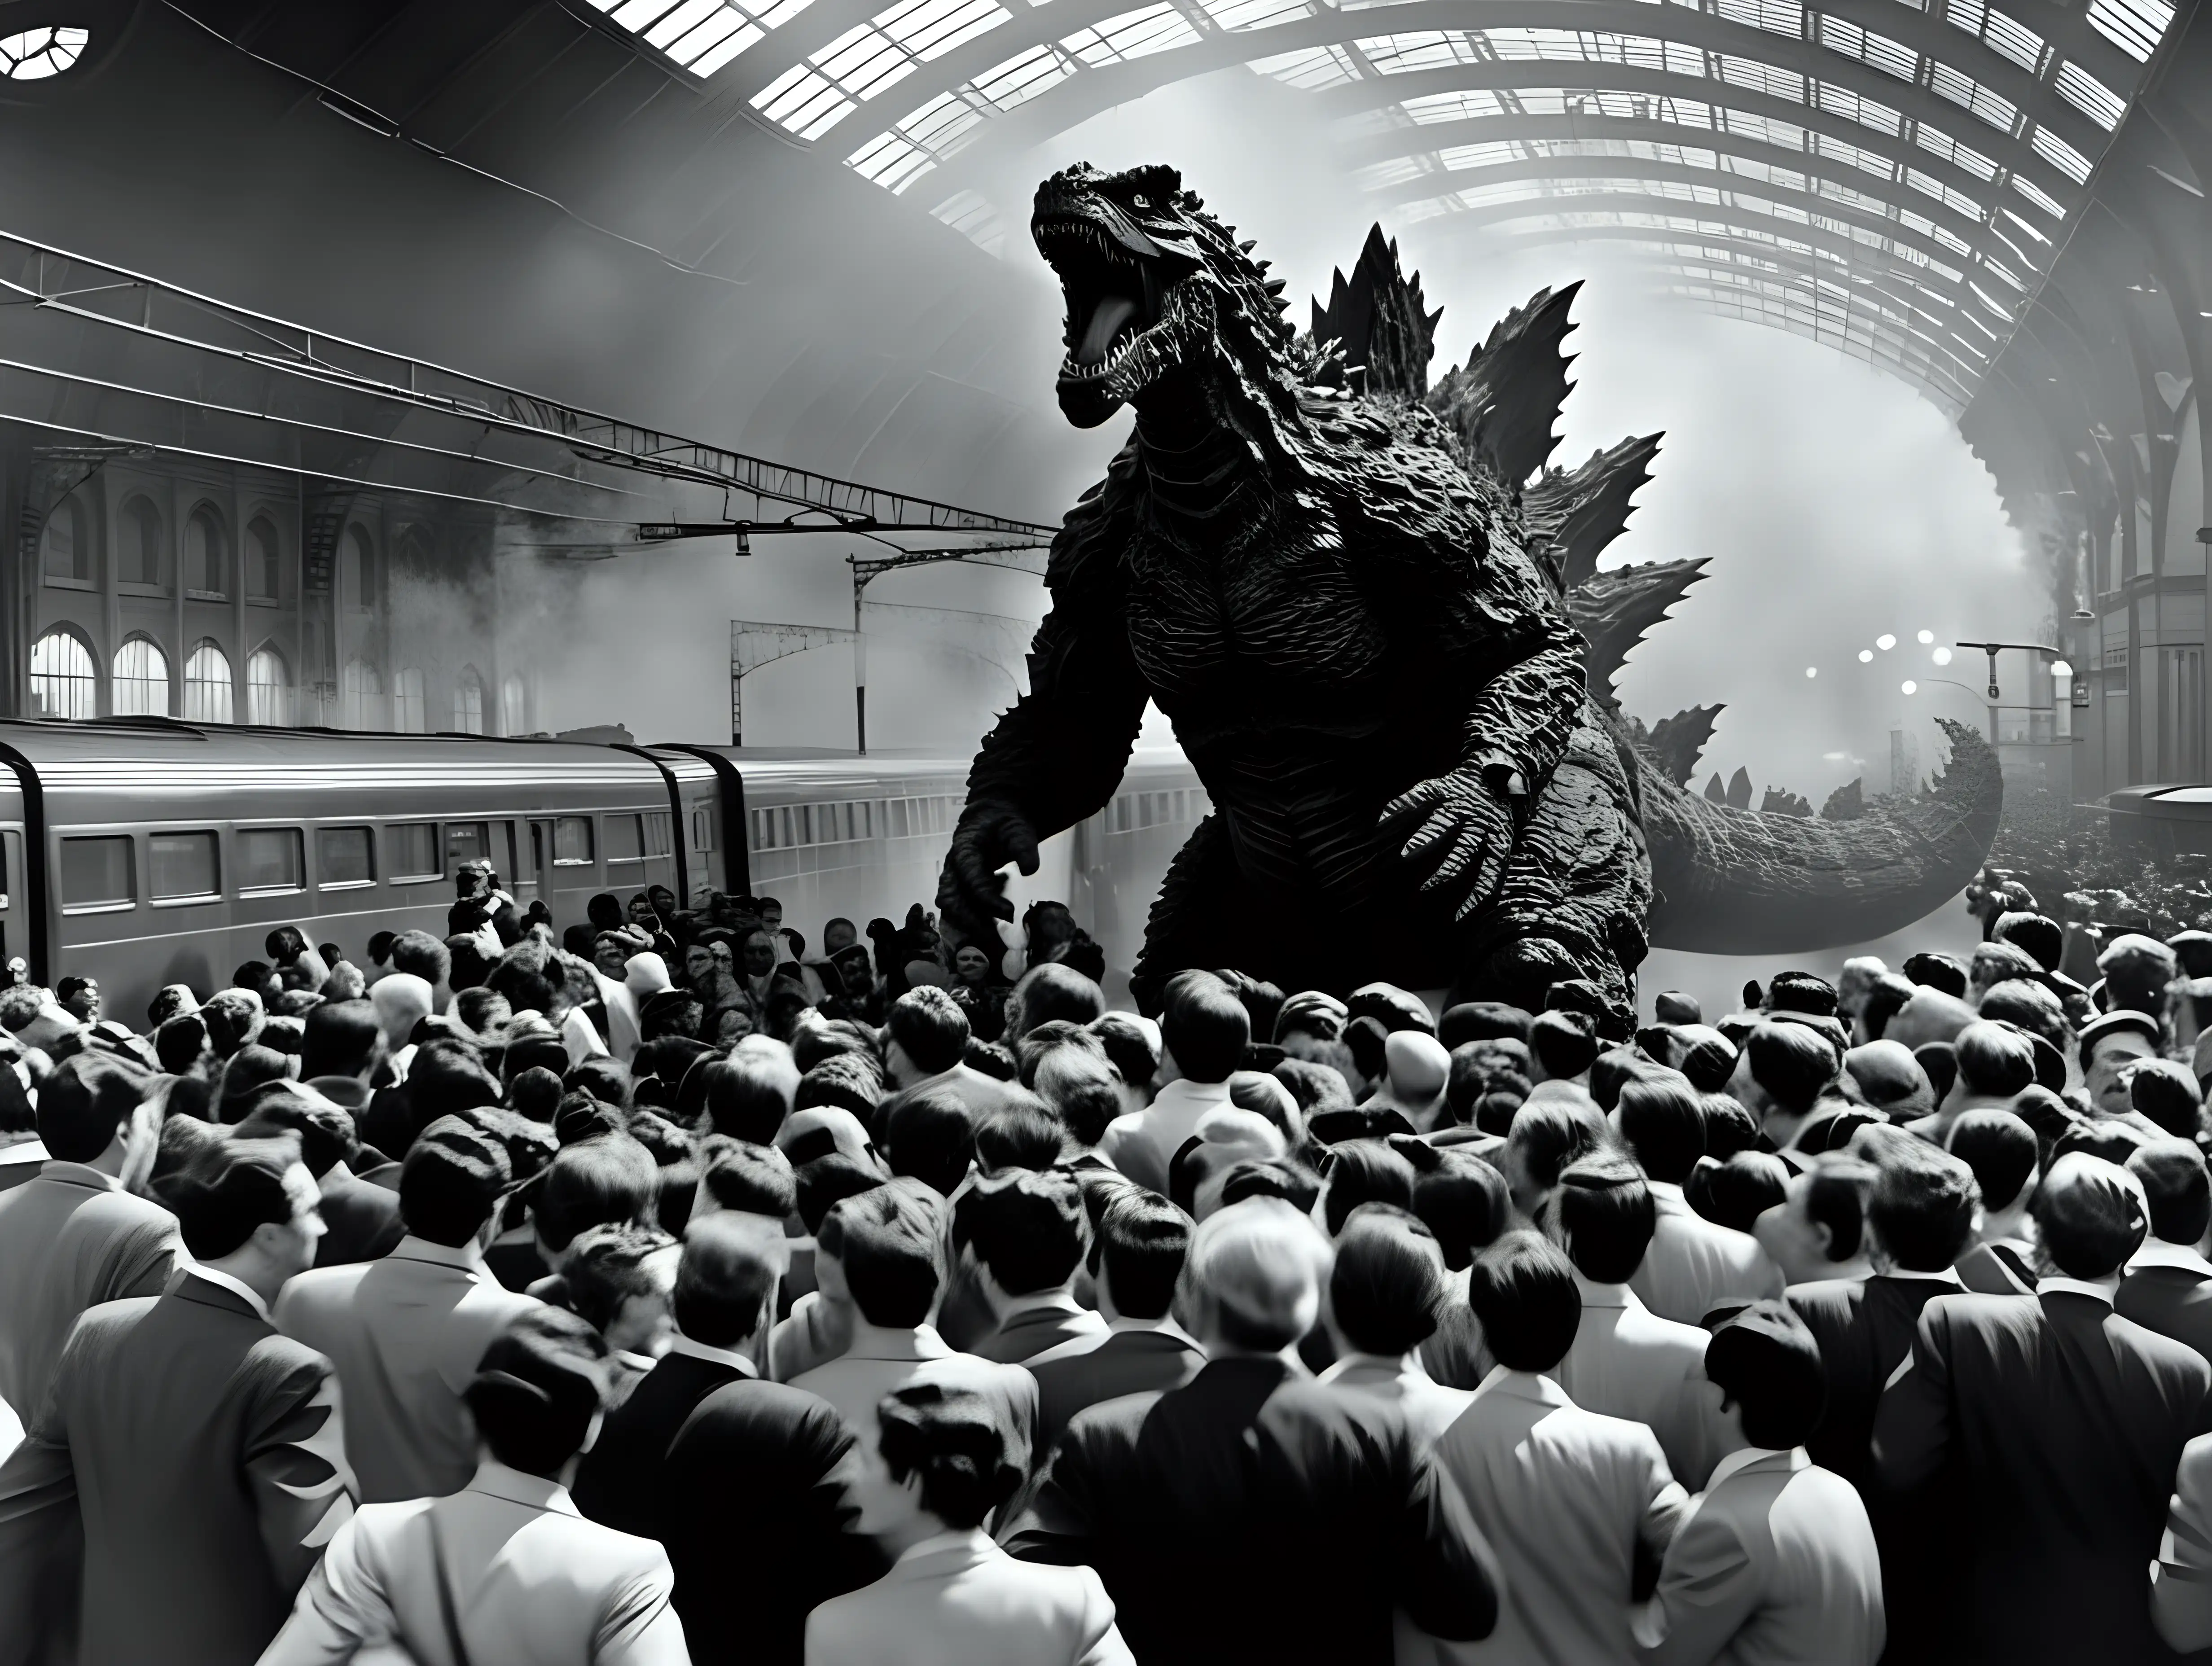 Panicked Commuters Escaping Godzilla Chaos at London Railway Station